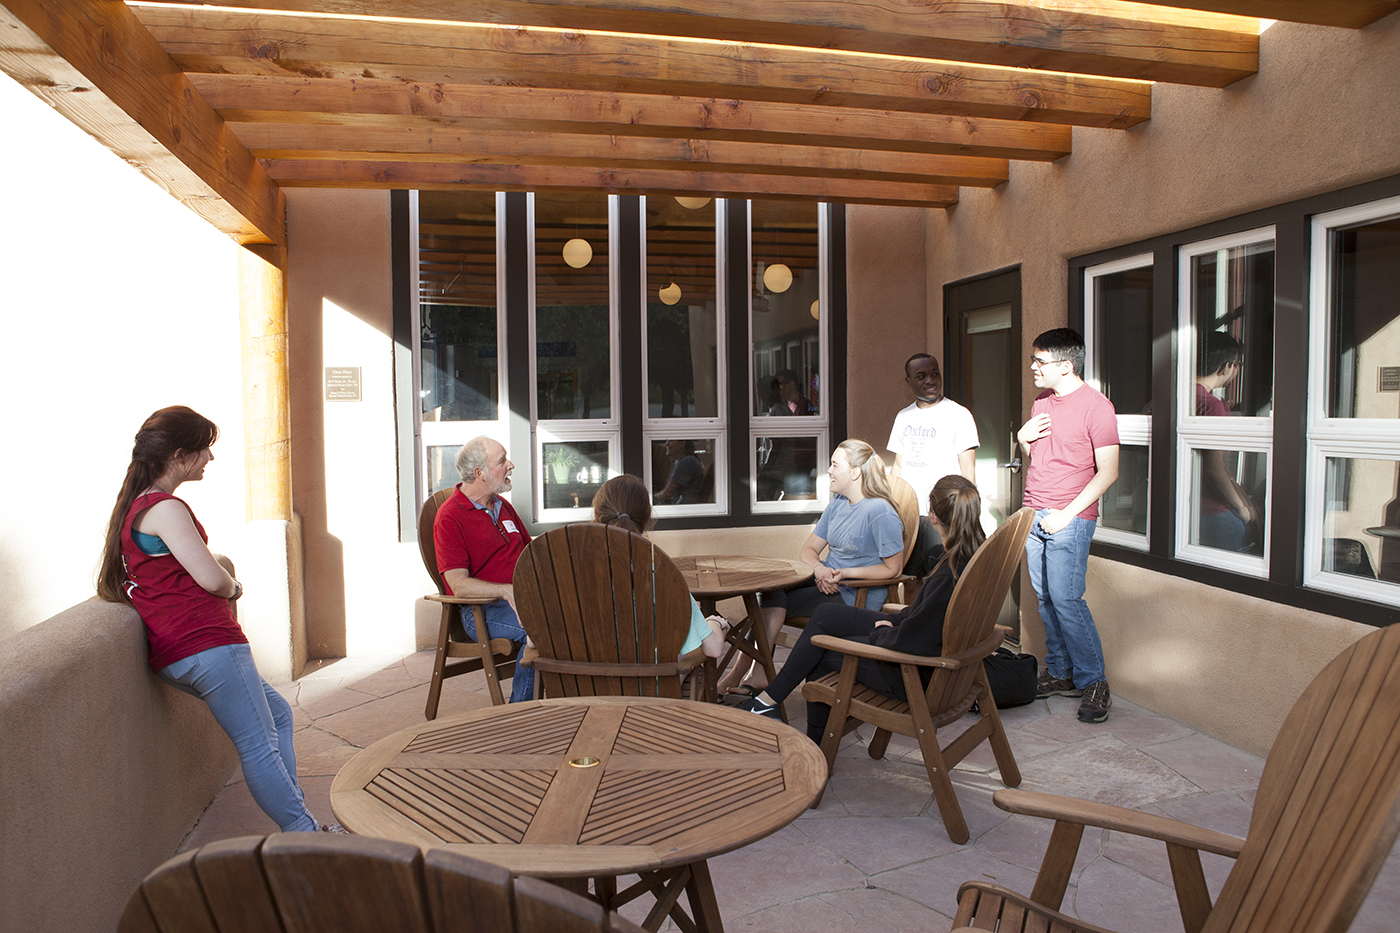 SMU-in-Taos faculty members talk to students on the patio